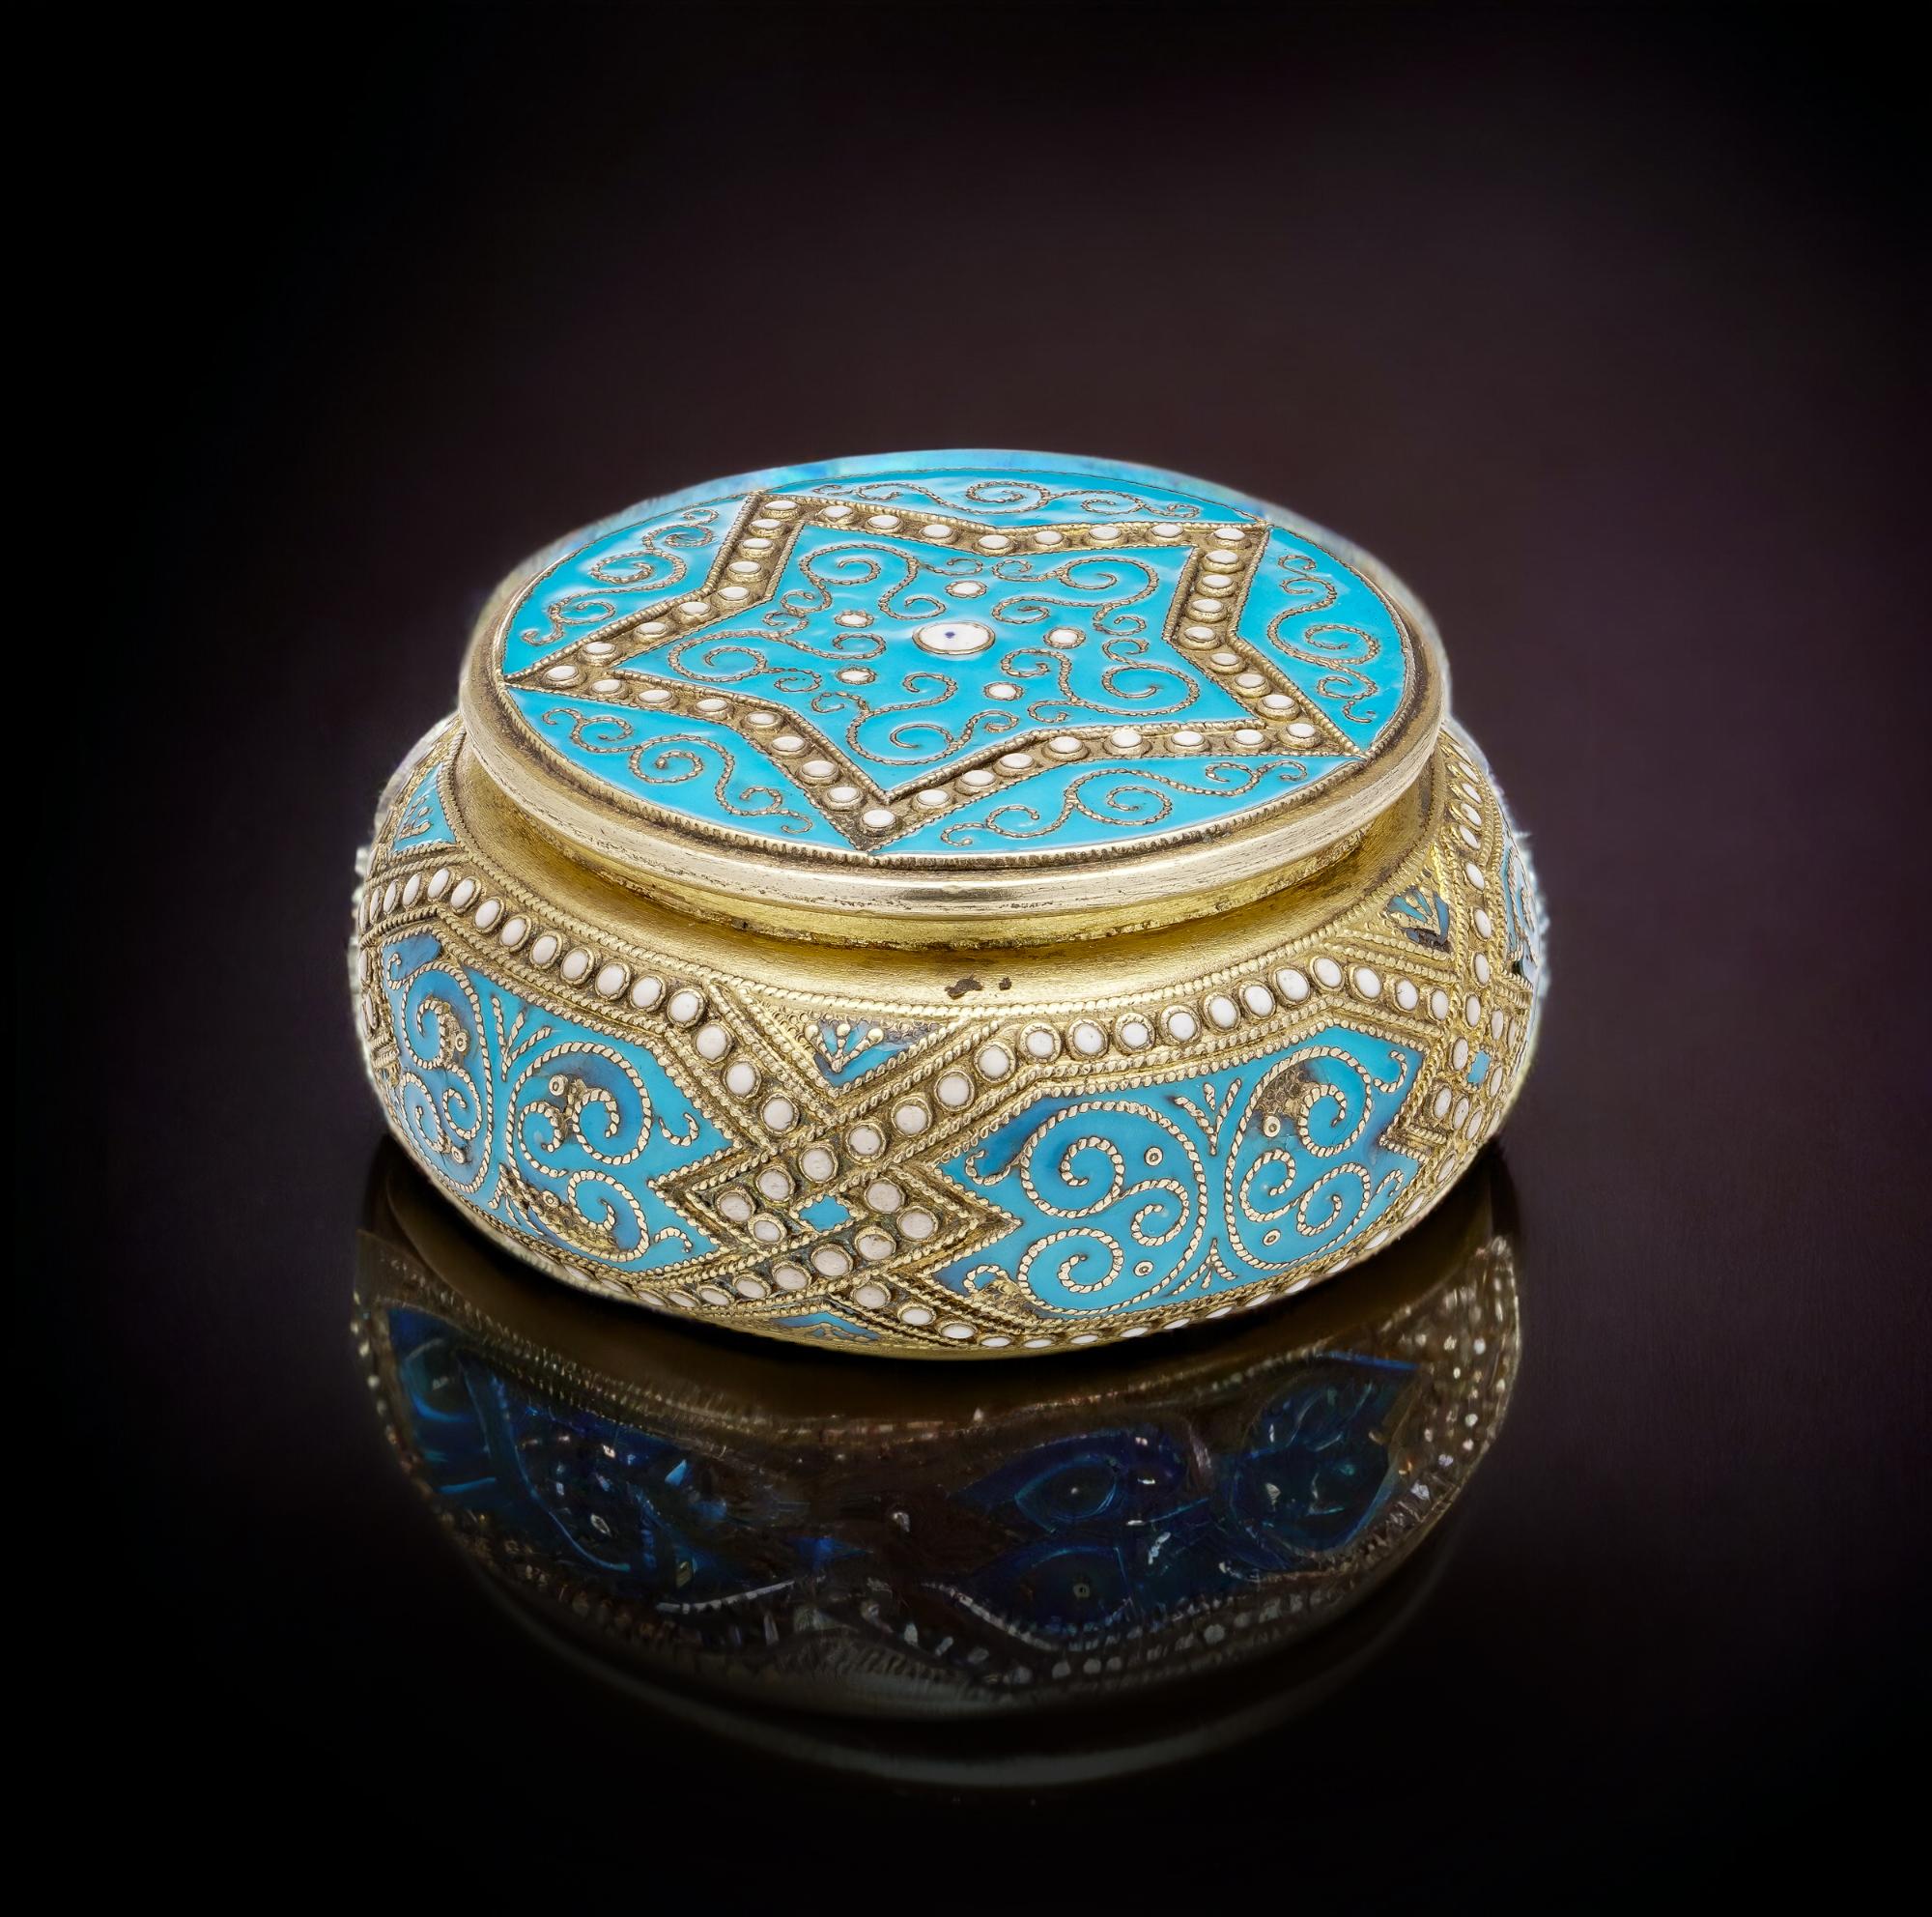 Exquisite Antique Silver and Cloisonné Enamel Pill Box by the Renowned Marius Hammer.
Maker: Marius Hammer
Made in Norway Circa 1910.

In the realm of silversmithing, few names are as celebrated as Marius Hammer. Hailing from Norway, Hammer is